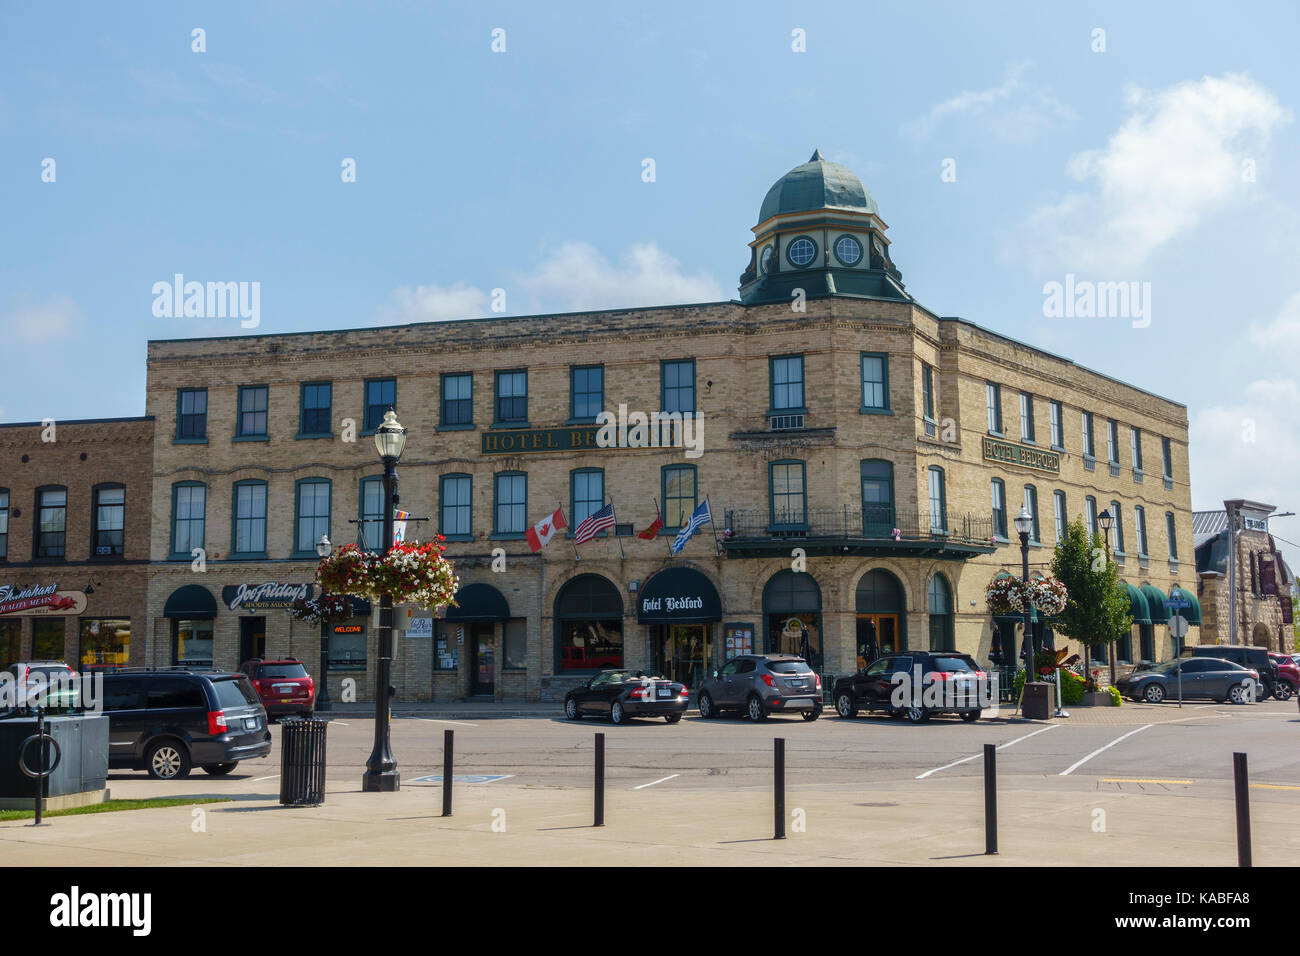 The Hotel Bedford In Goderich Town Centre A Heritage Building Ontario Canada, Goderich Voted The Prettiest Town In Canada Stock Photo